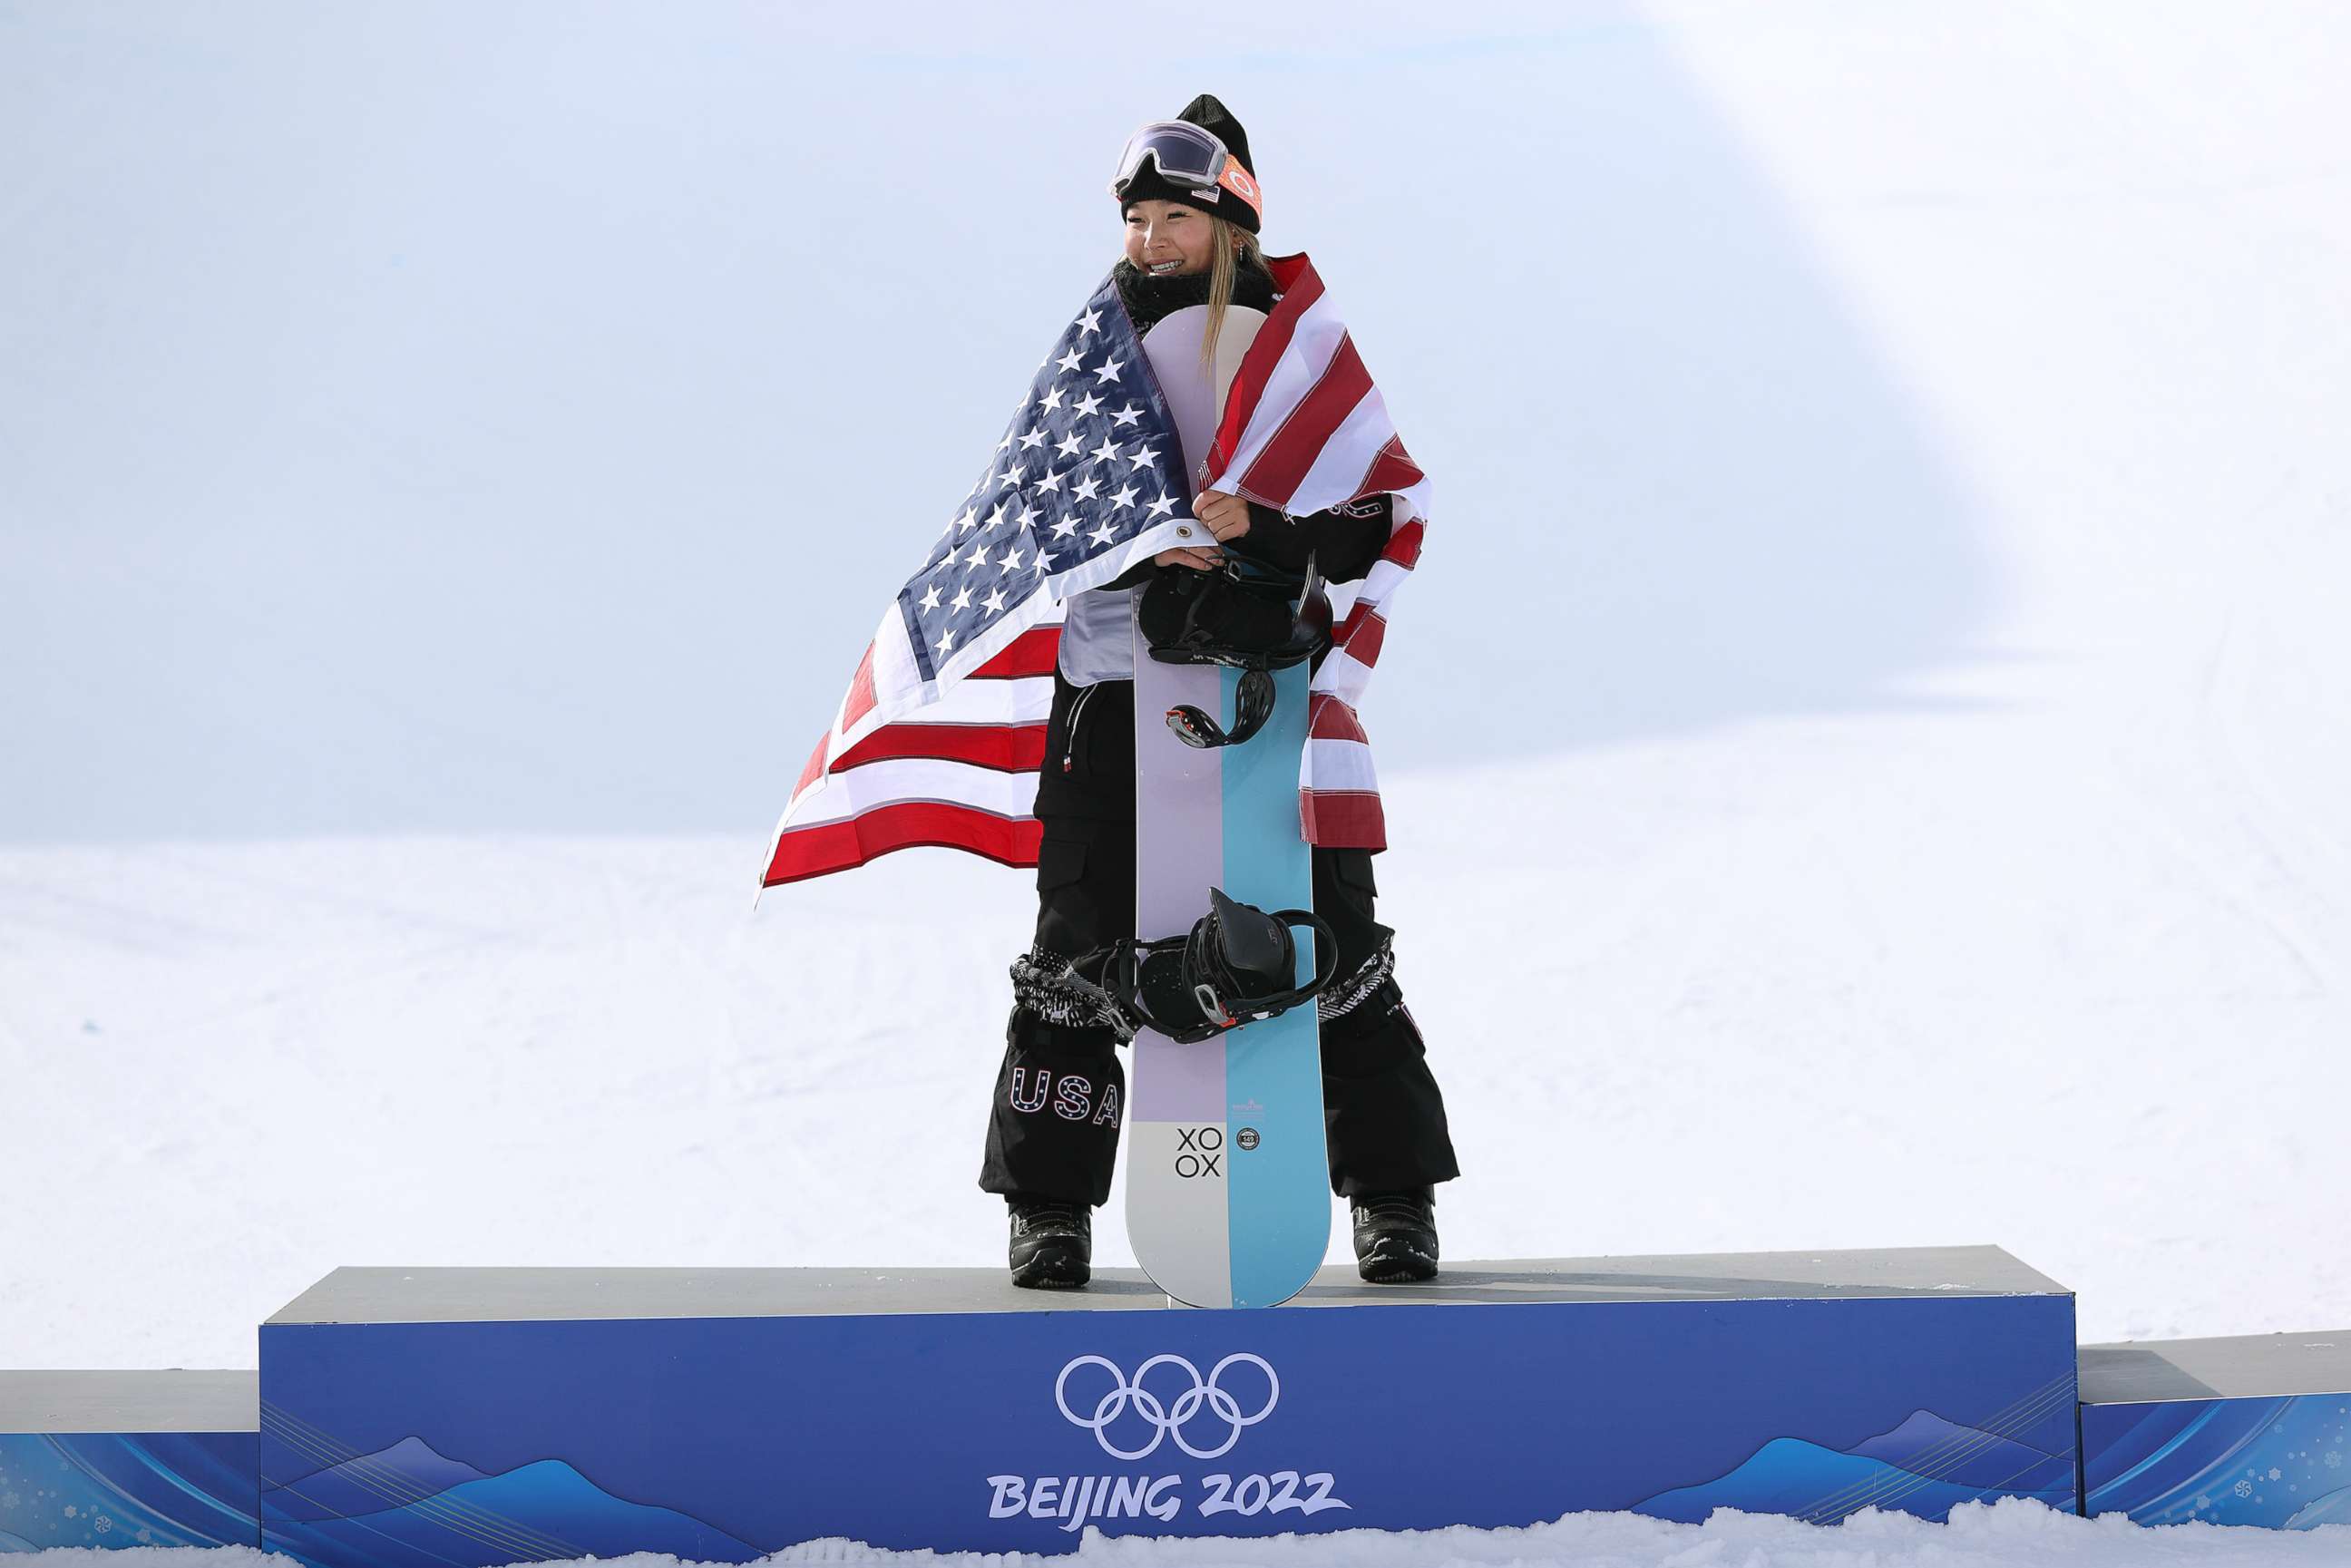 PHOTO: Gold medallist Chloe Kim of Team USA celebrates during the women's snowboard halfpipe final flower ceremony at the Beijing 2022 Winter Olympics at Genting Snow Park on Feb. 10, 2022, in Zhangjiakou, China.